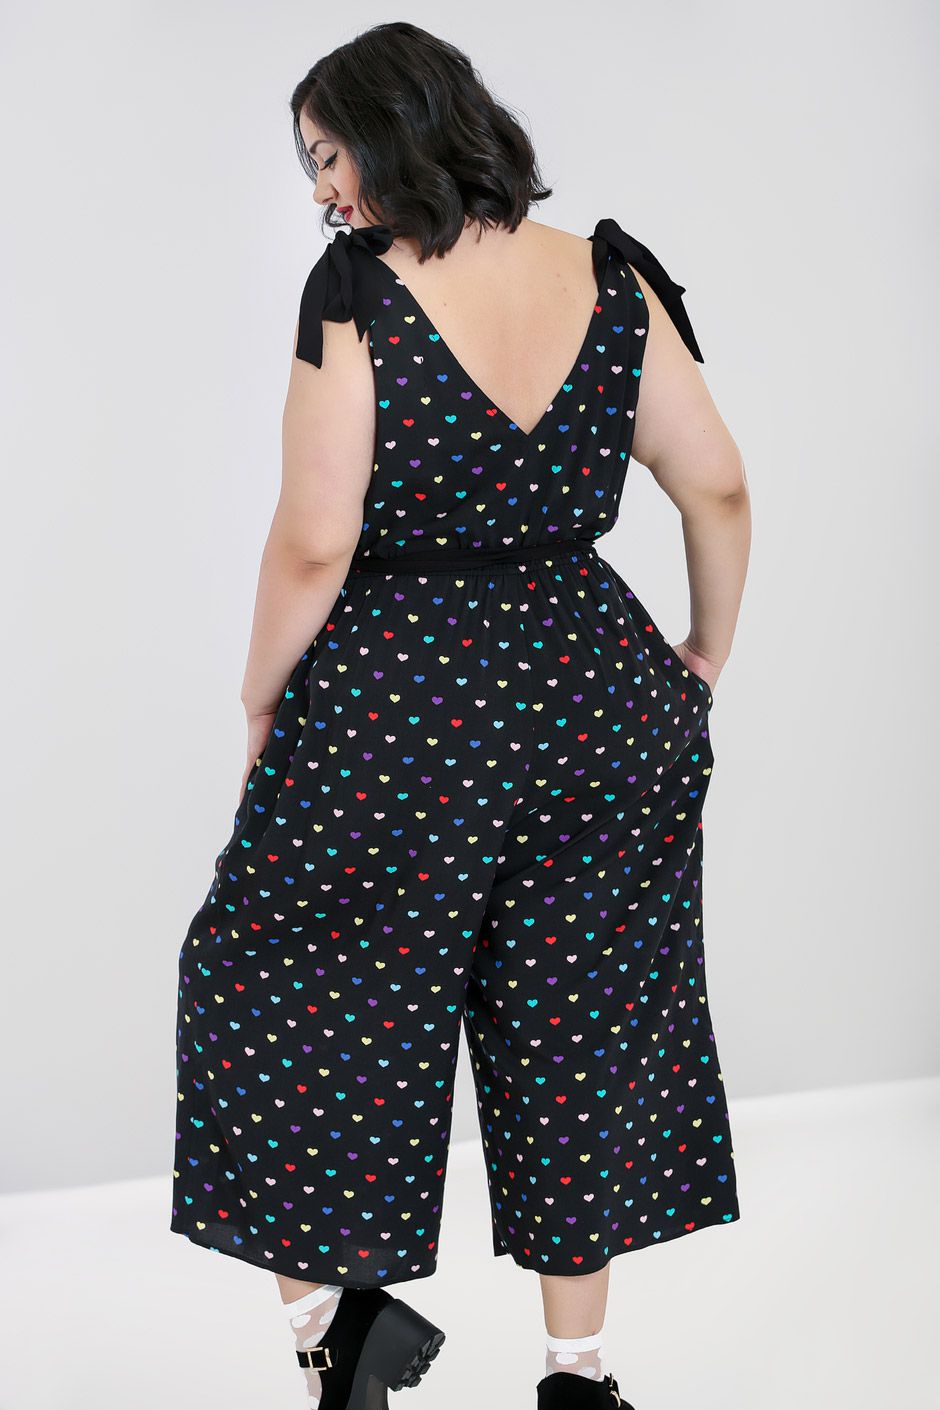 PS50116bbbbbbbb_combinaison-jumpsuit-pinup-50-s-retro-rockabilly-true-love